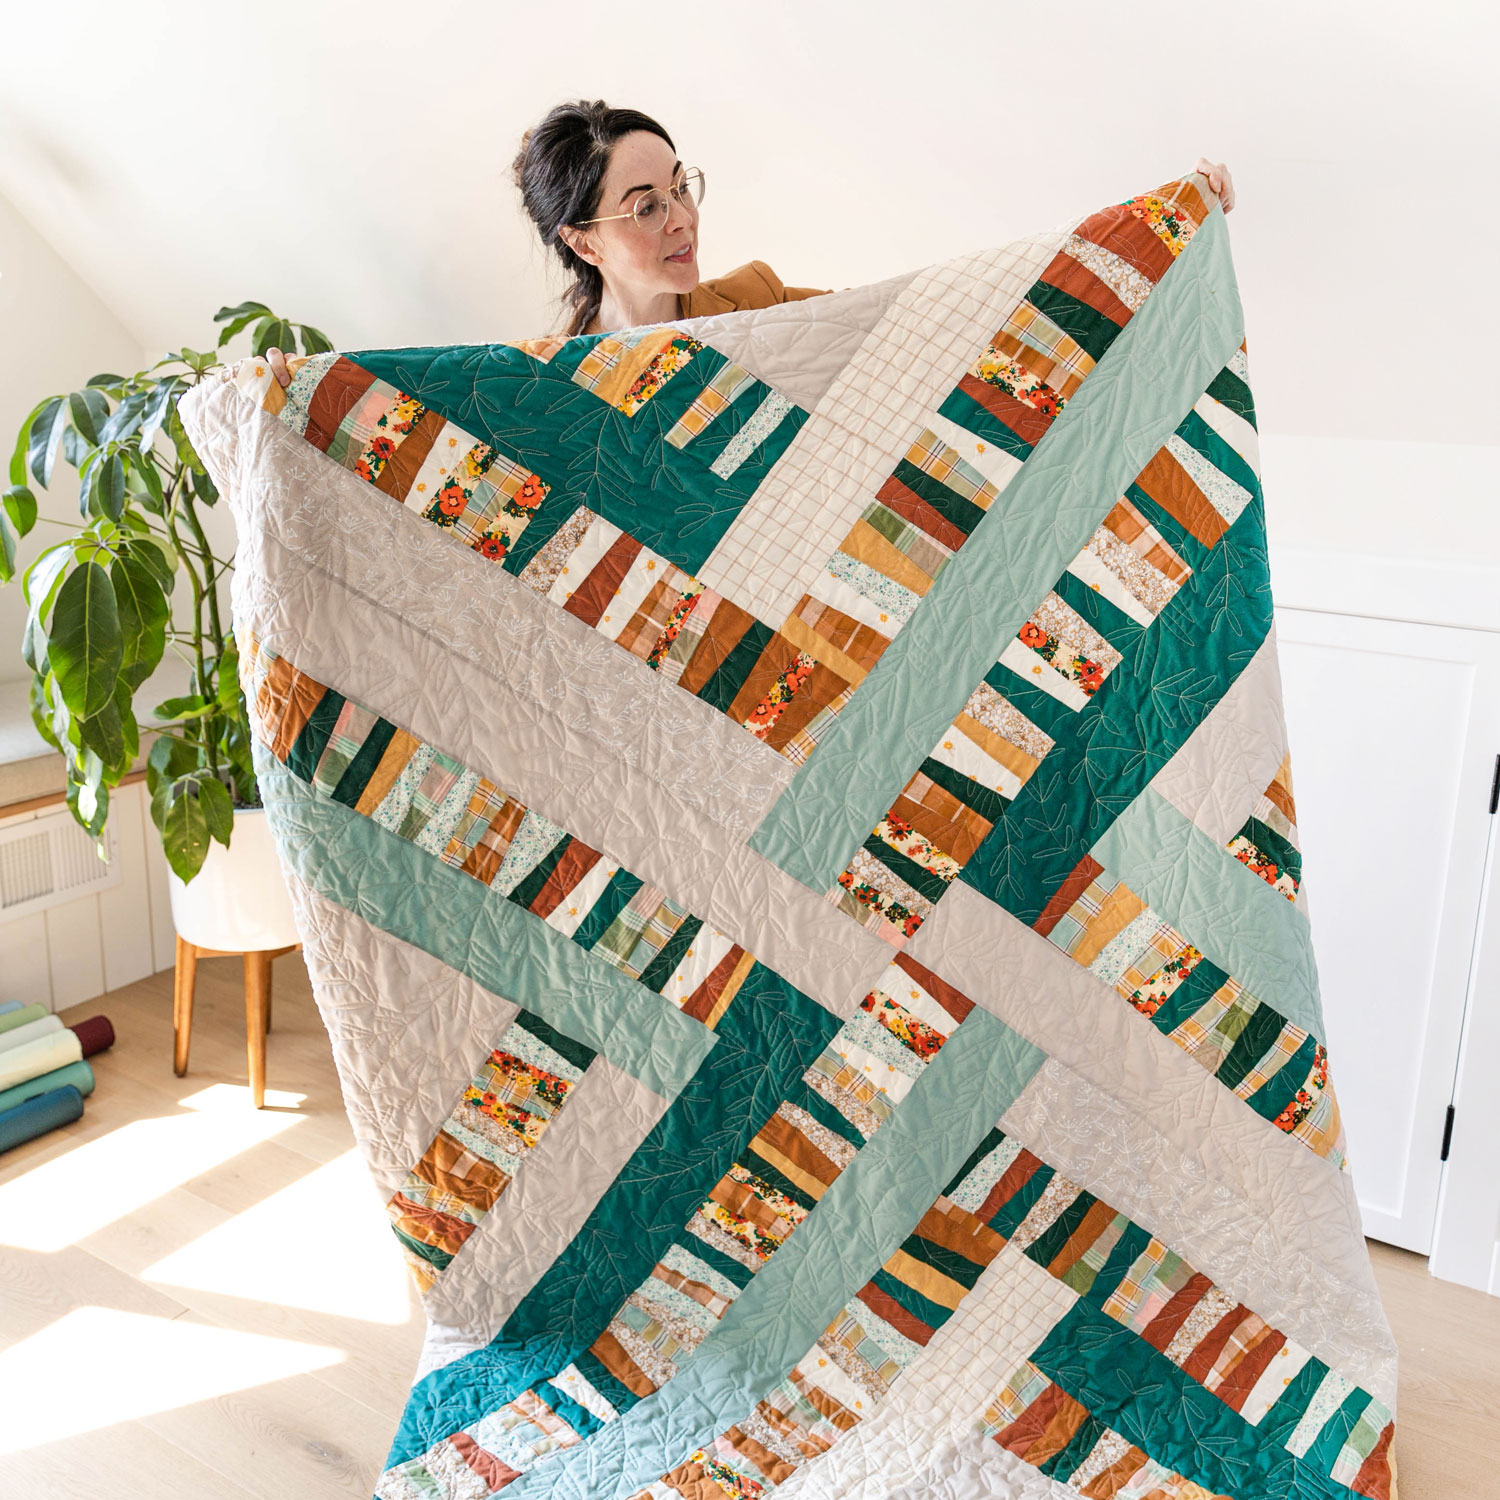 Join the Garland quilt sew along for extra tips on making this beautiful quilt pattern!